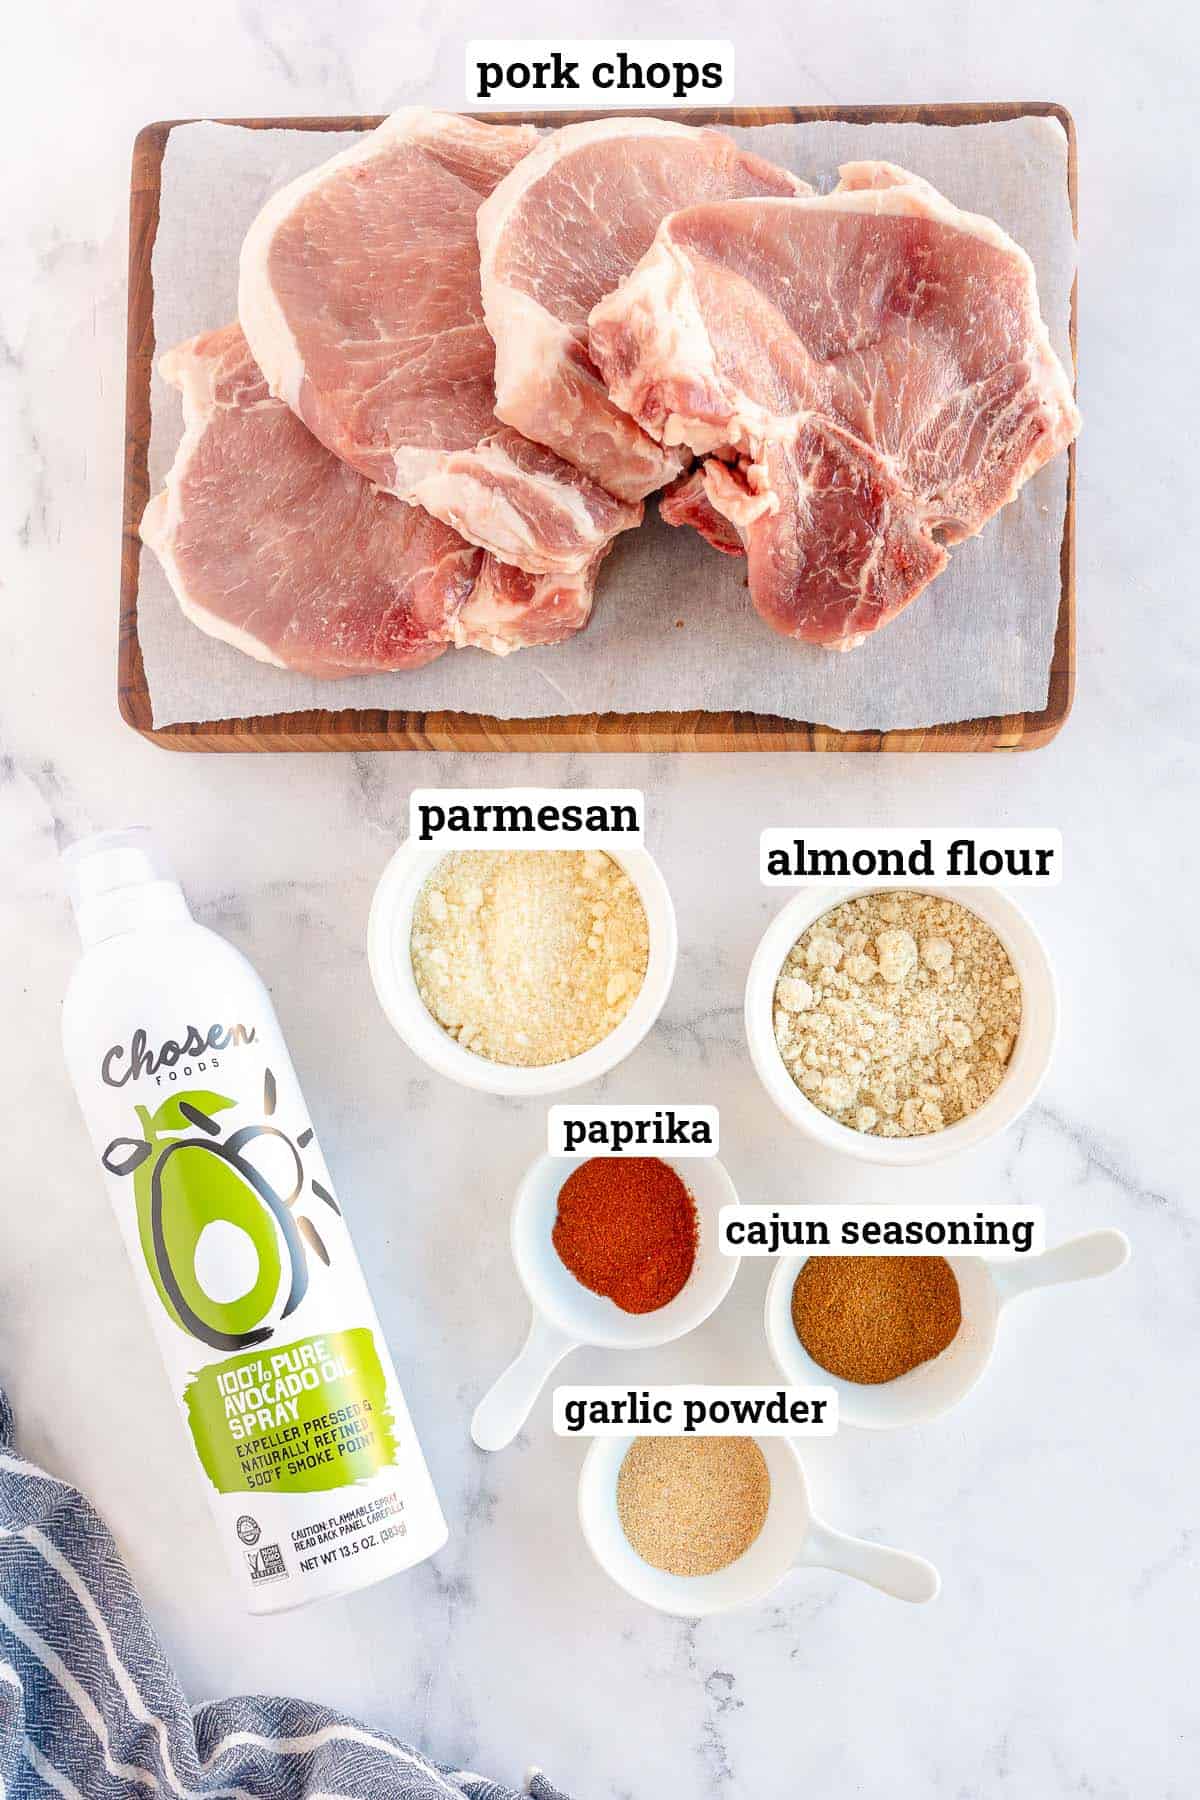 The ingredients for gluten free air fryer pork chops with overlay text.